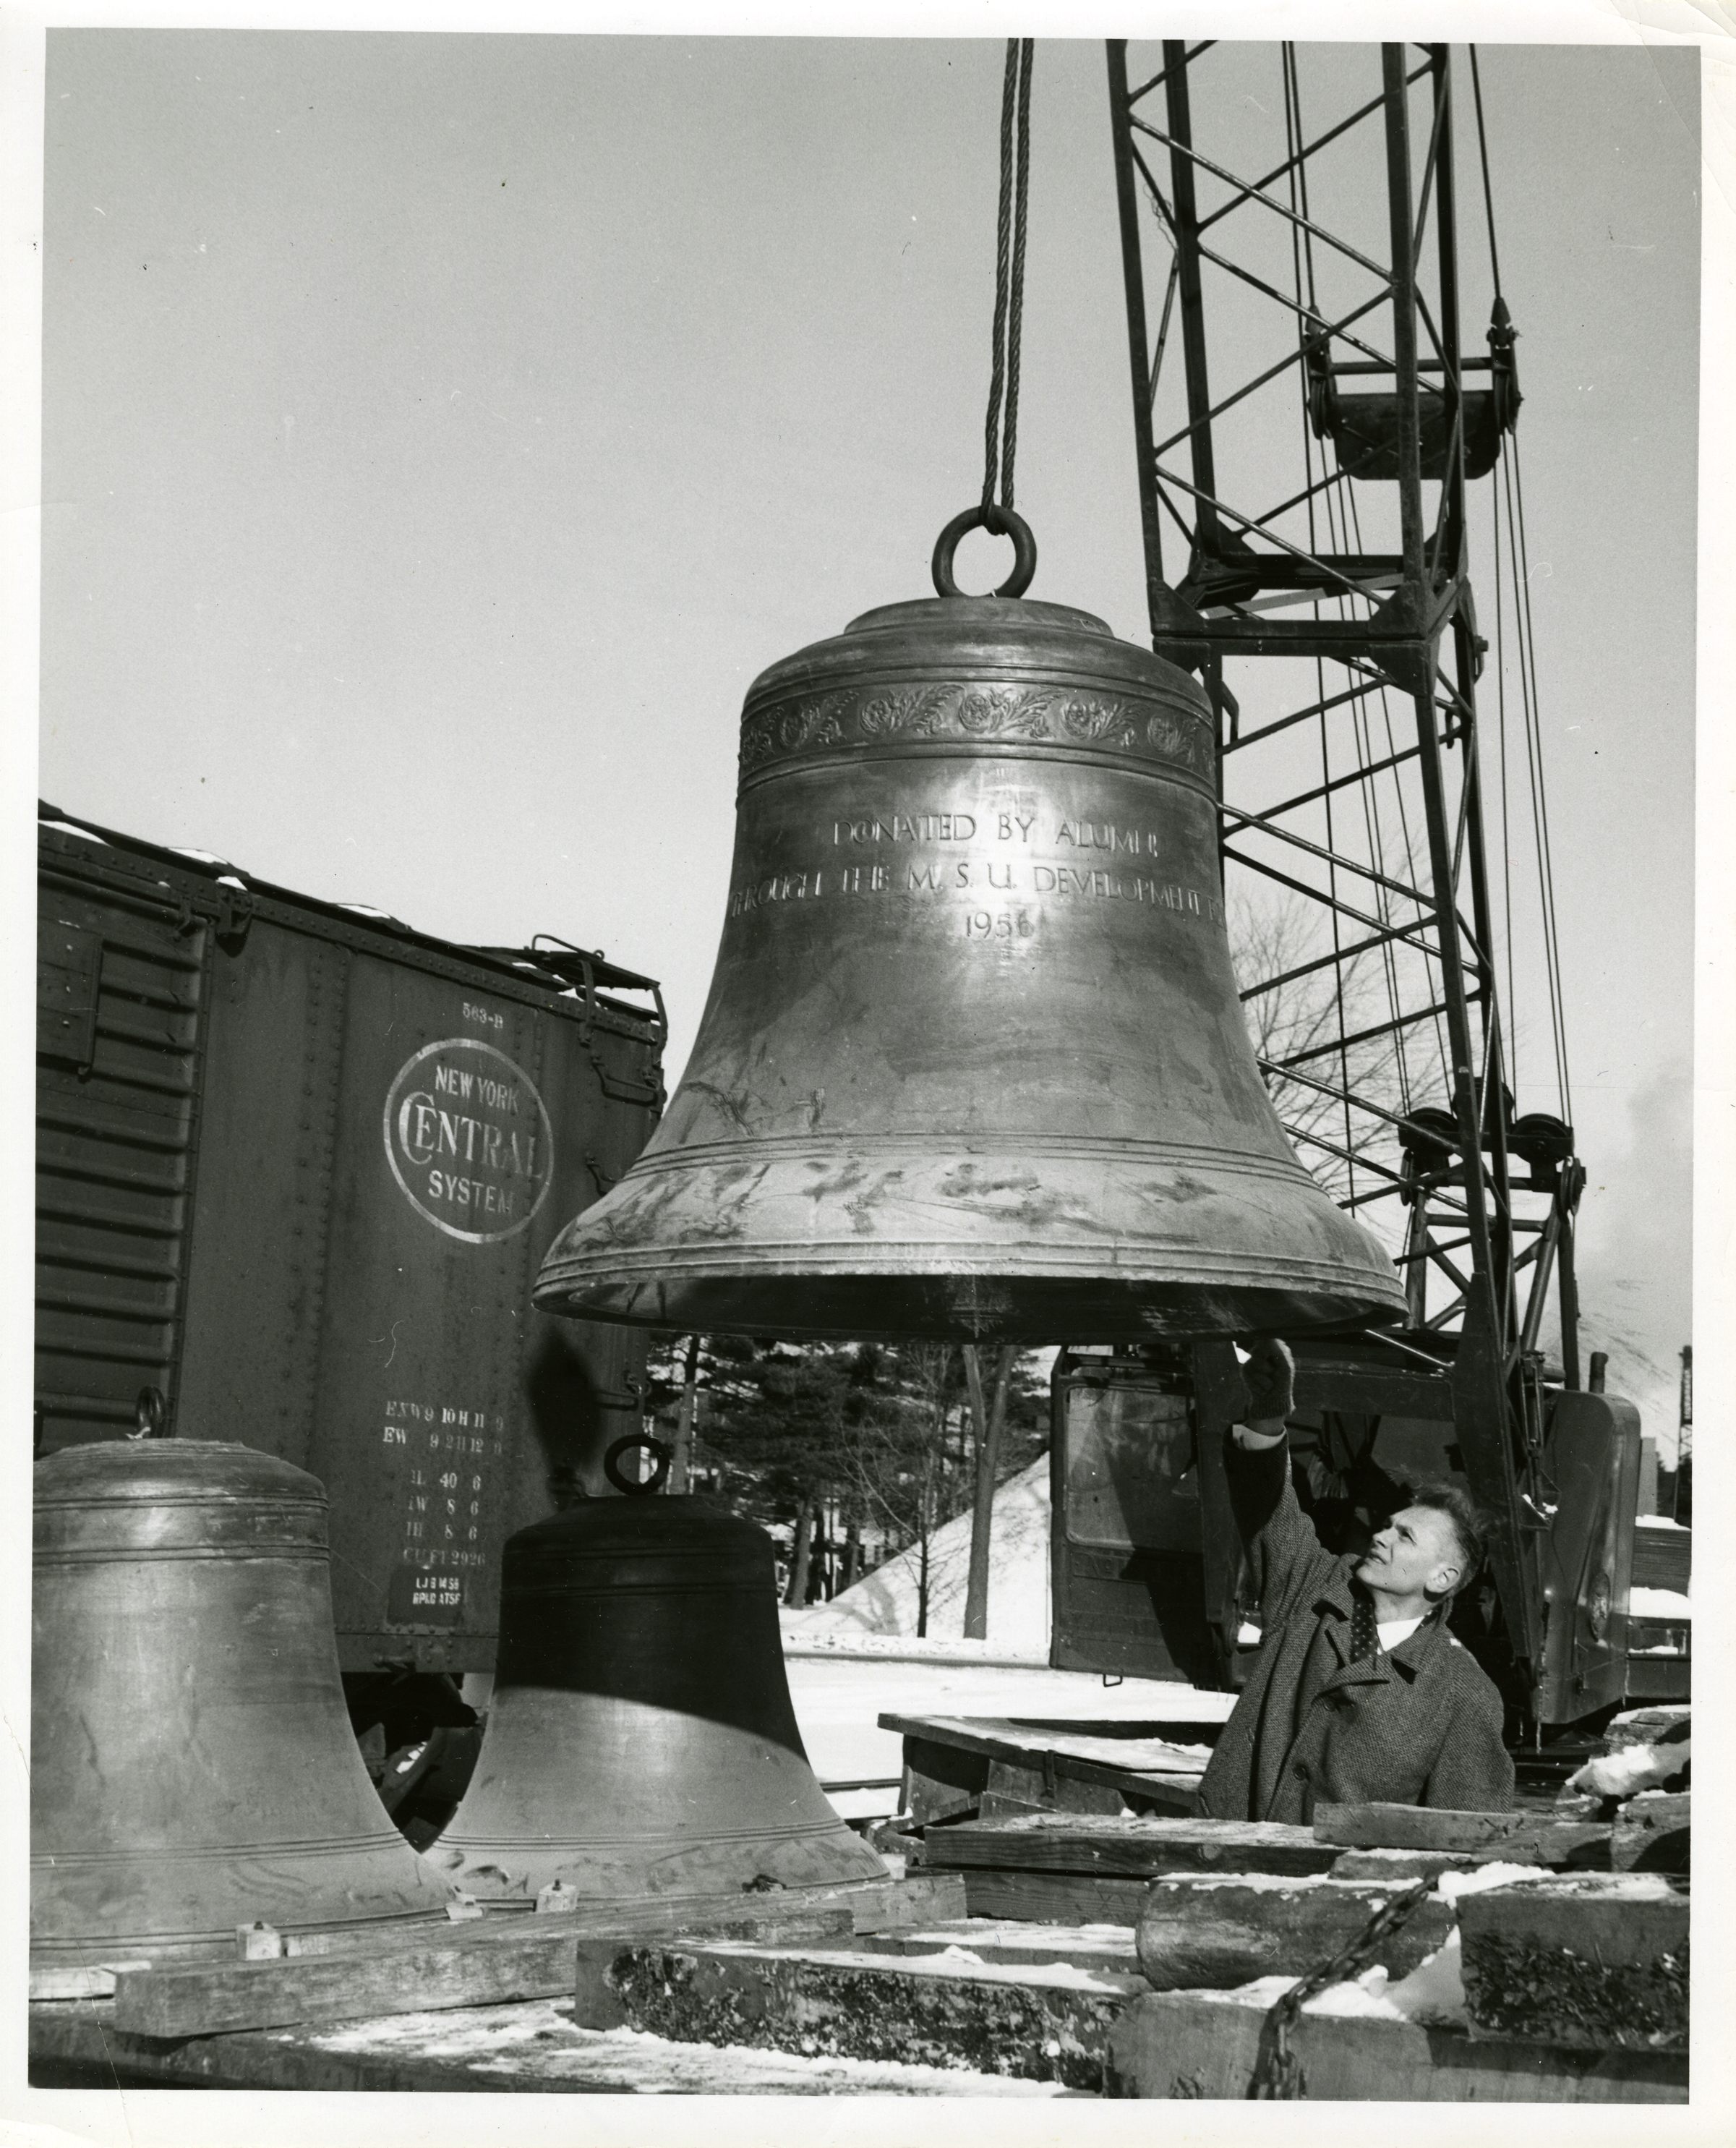 Wendell Wescott inspecting a Beaumont Tower bell, January 6, 1959